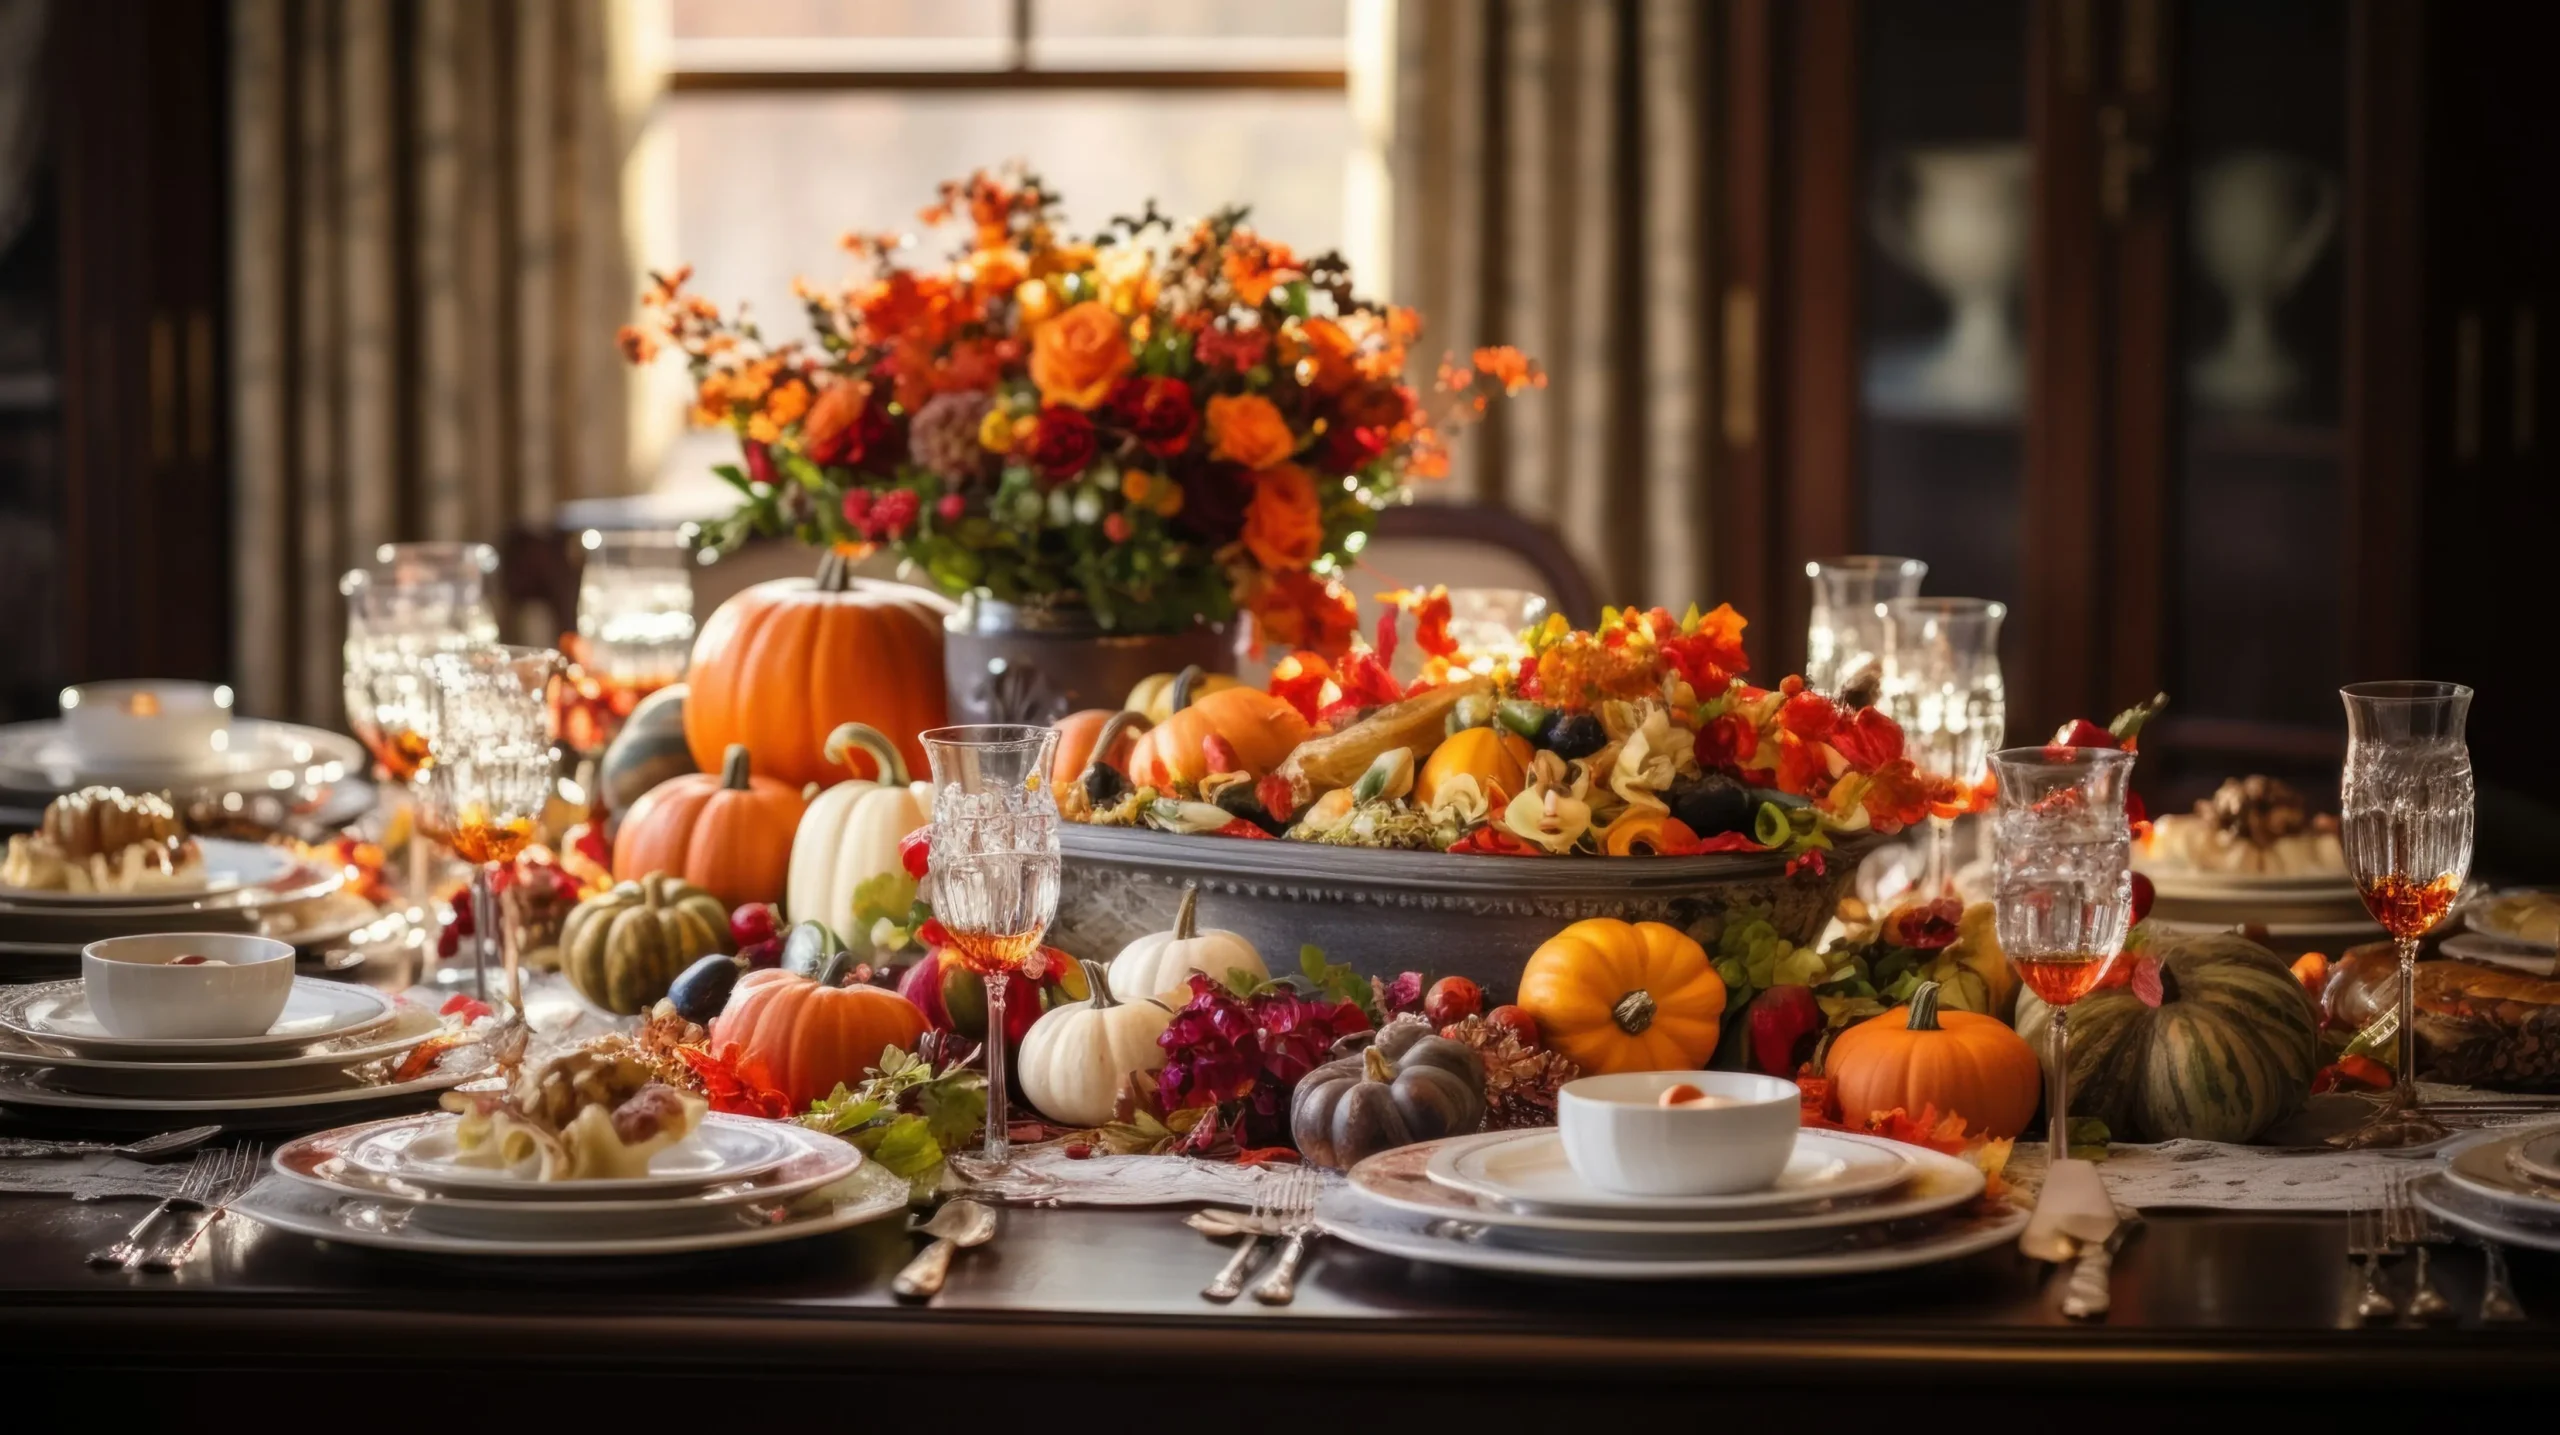 Event florist in Sacramento, CA crafts Thanksgiving tablescapes featuring pumpkins, autumn accents, and vibrant blooms for a cozy and celebratory atmosphere.